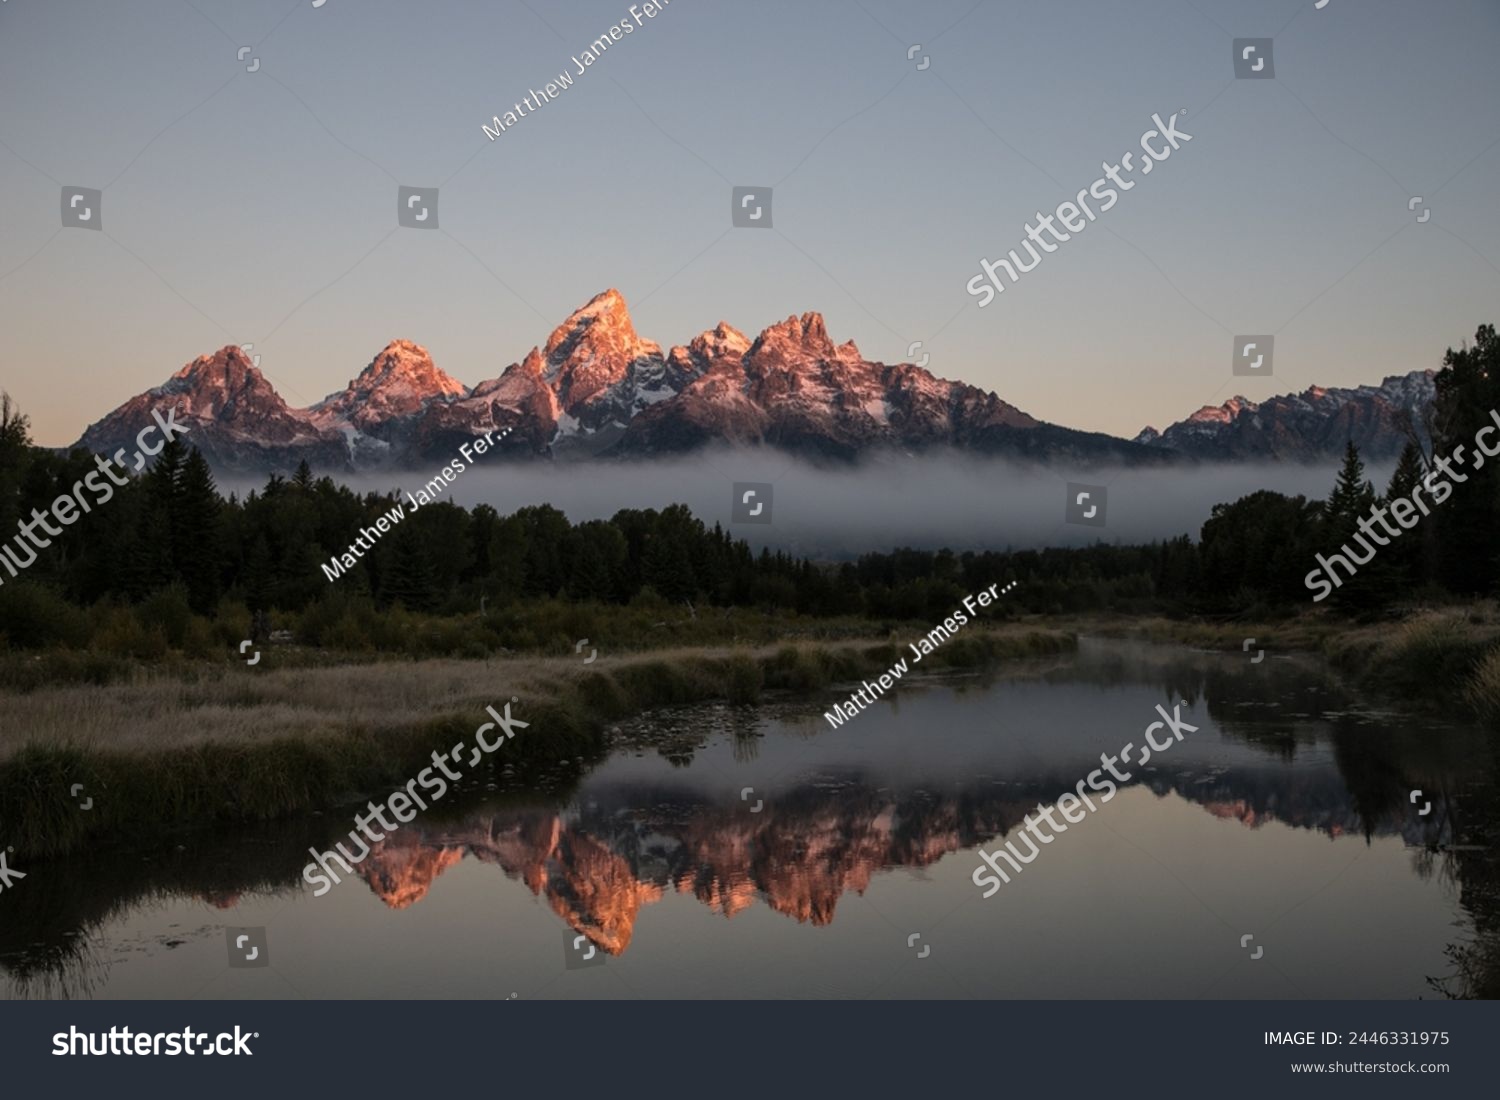 Grand Tetons, Wyoming, USA, Sunrise Landscape, Majestic Peaks, Teton Range, Rocky Mountains, Scenic Beauty, Outdoor Photography, Nature Photography, Golden Hour, Morning Glow, Spectacular View, River #2446331975